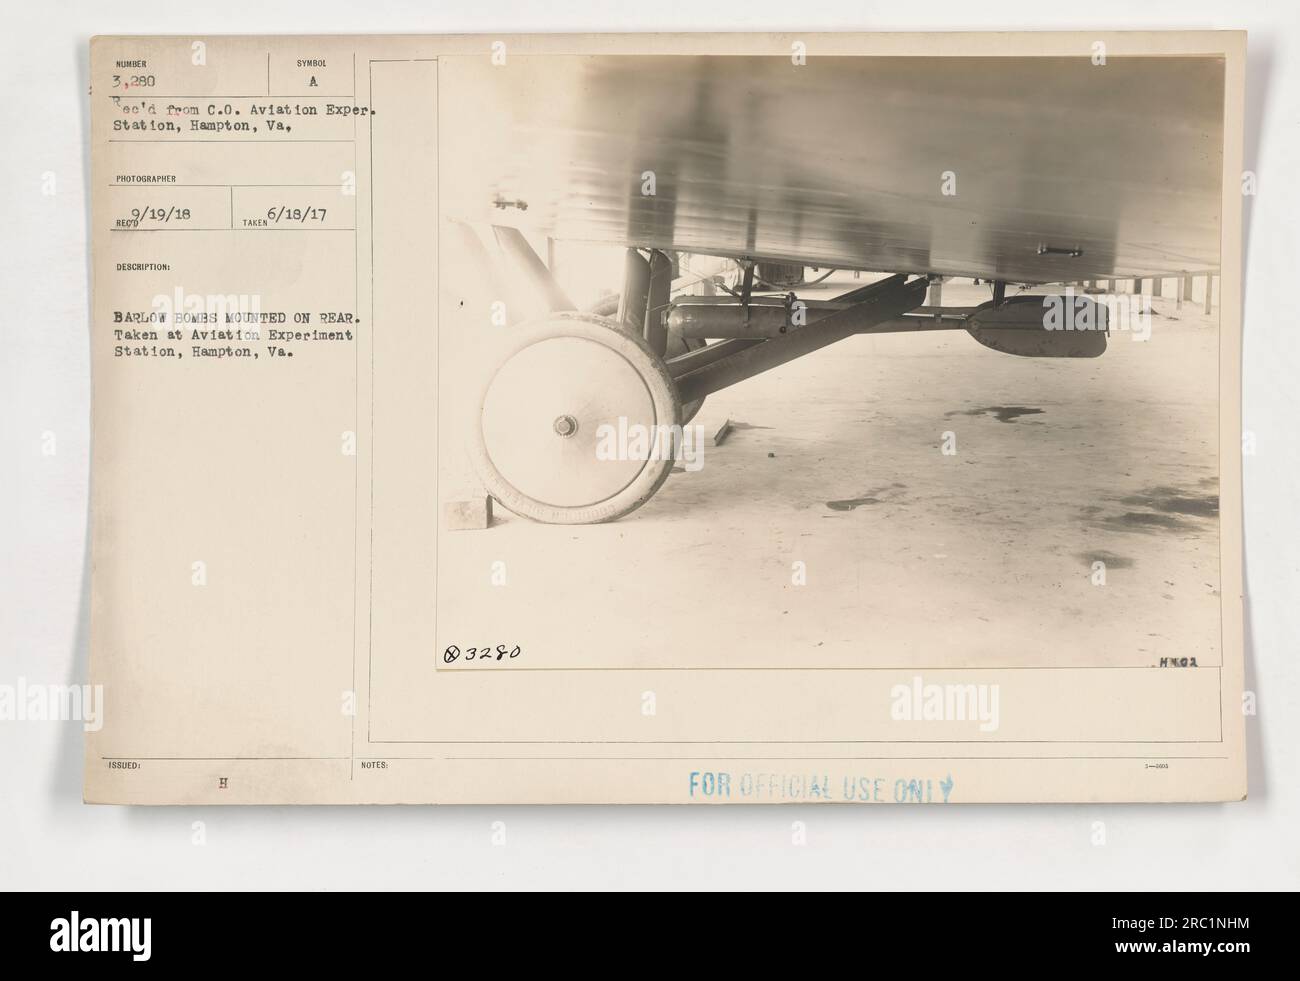 '111-SC-3280 - Barlow Bombs mounted on Rear. This photograph was taken at the Aviation Experiment Station in Hampton, VA. The image shows Barlow bombs symbolically placed on the rear. It was captured on June 18, 1917, with the official use limited to authorized personnel.' Stock Photo